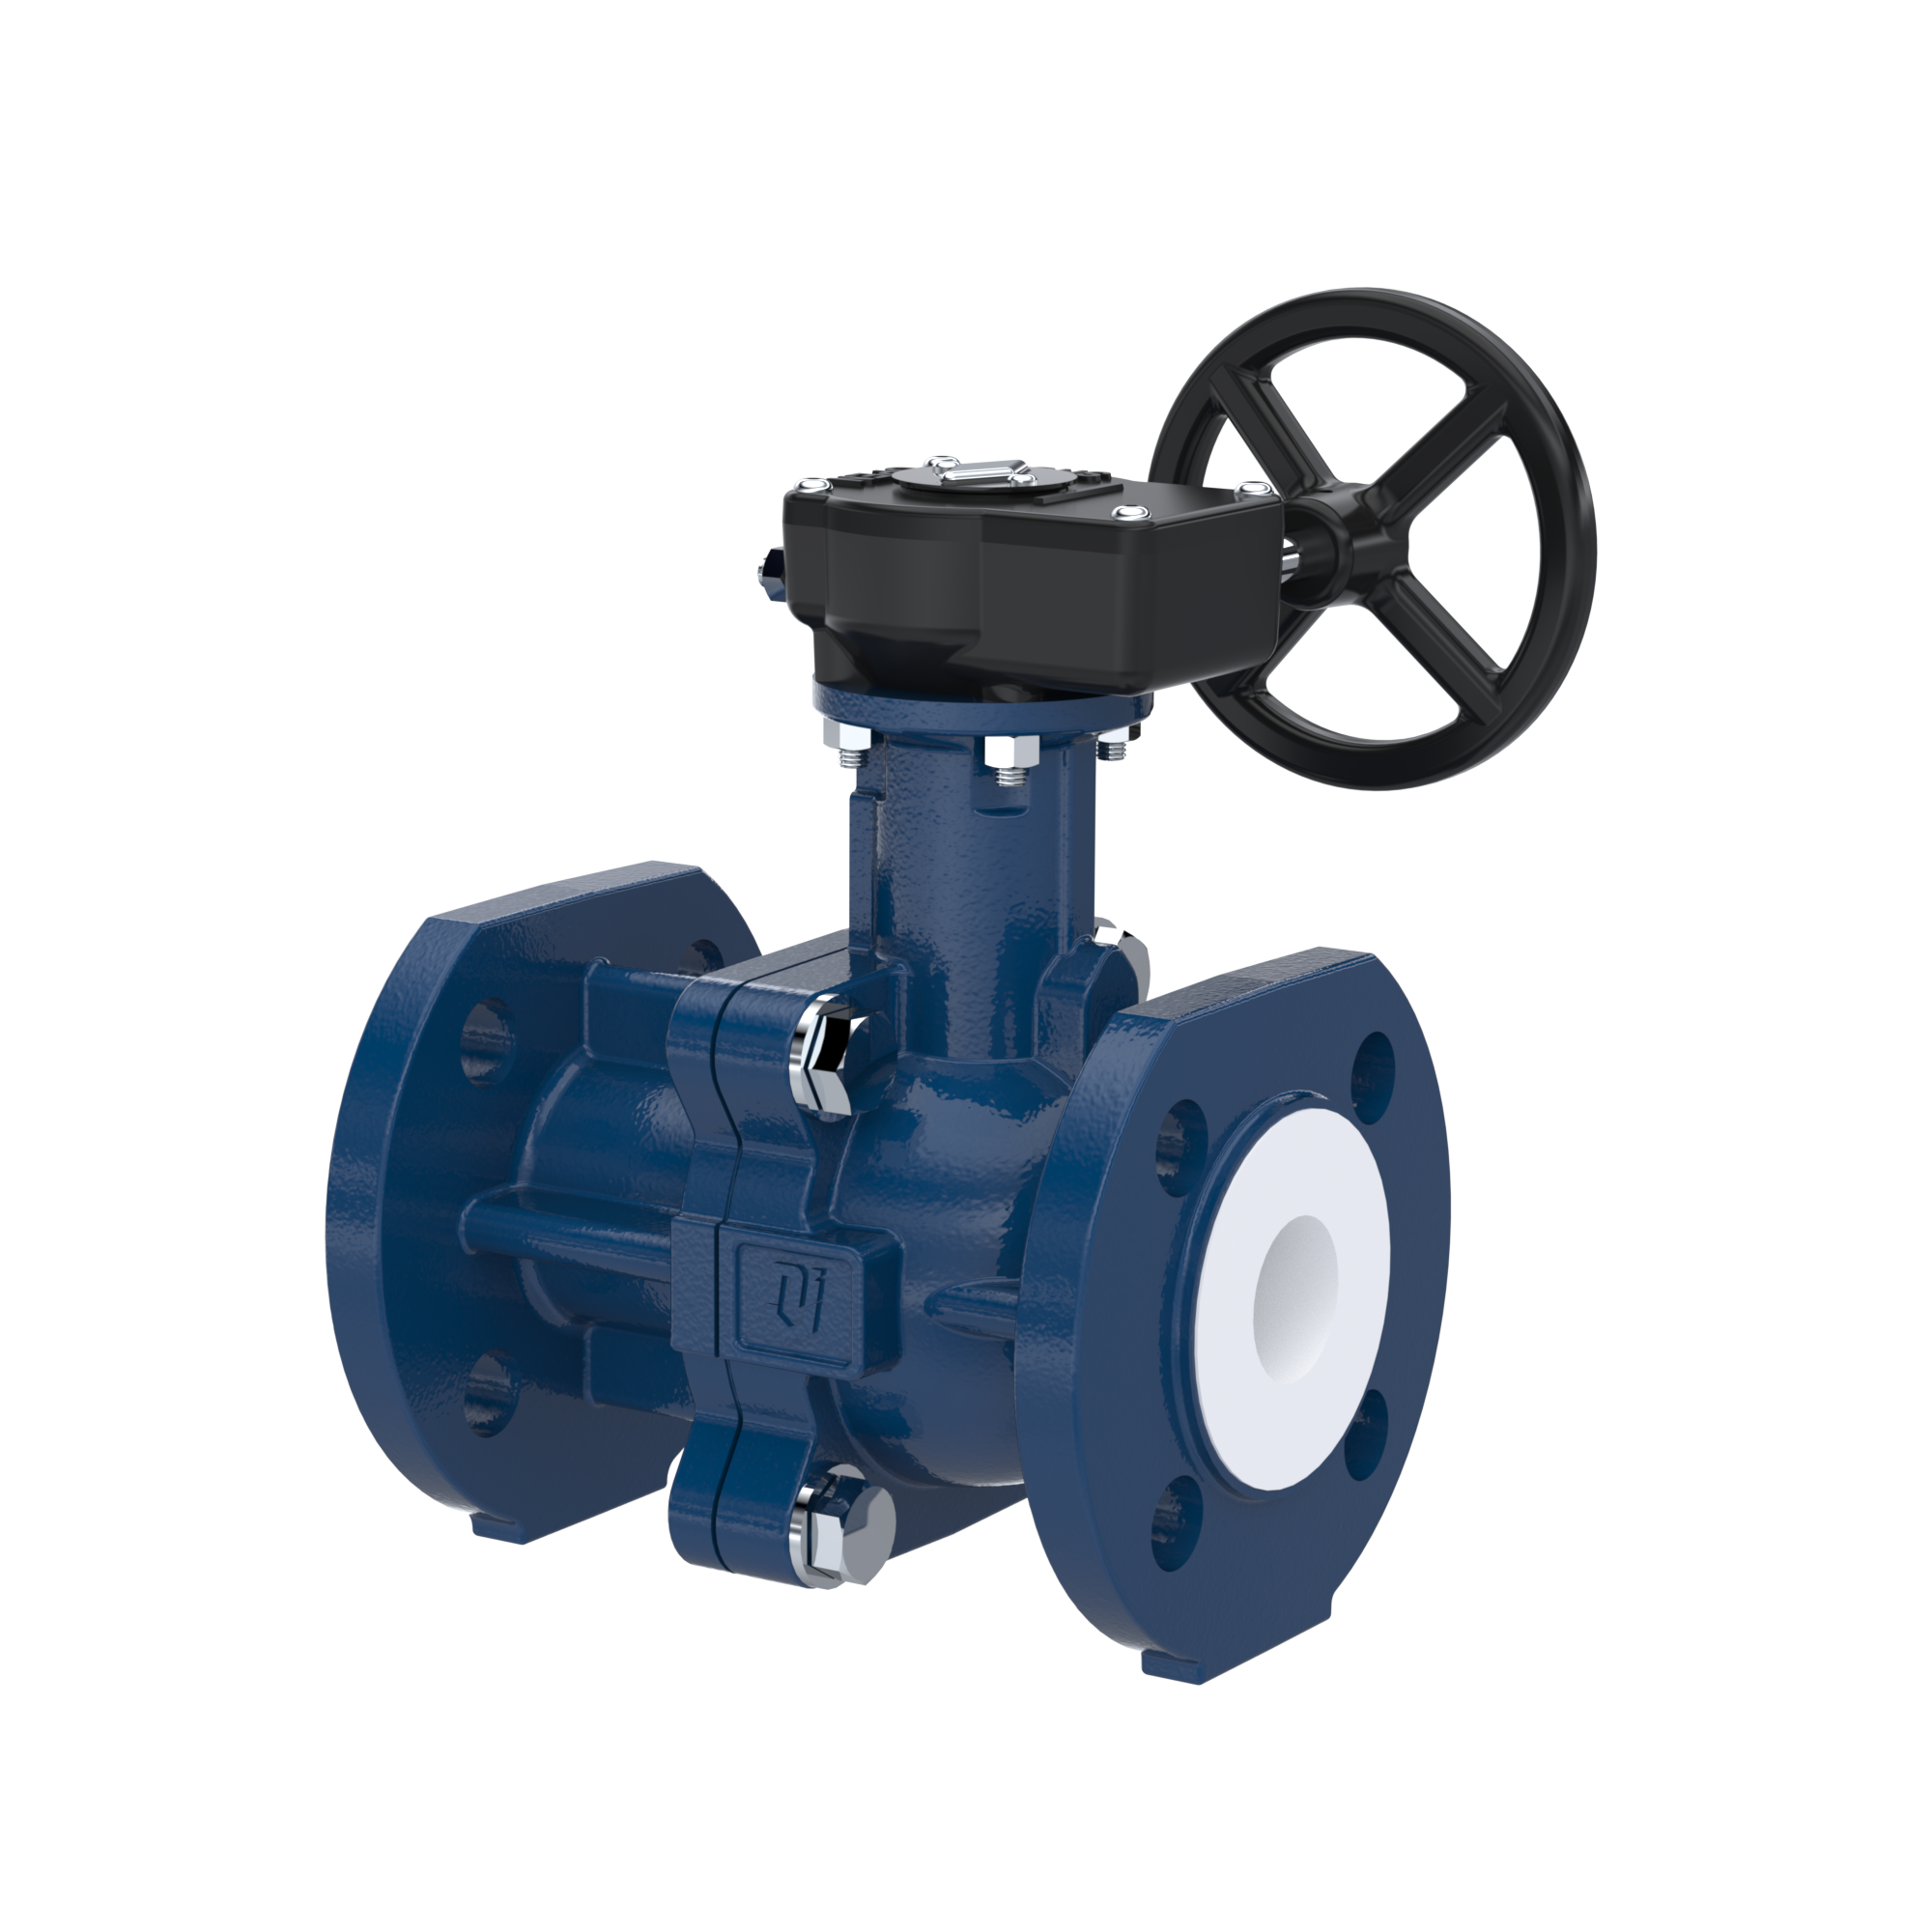 PFA-flange ball valve FK13 DN40 - 1 1/2" inch PN10/16 made of spheroidal graphite cast iron with worm gear